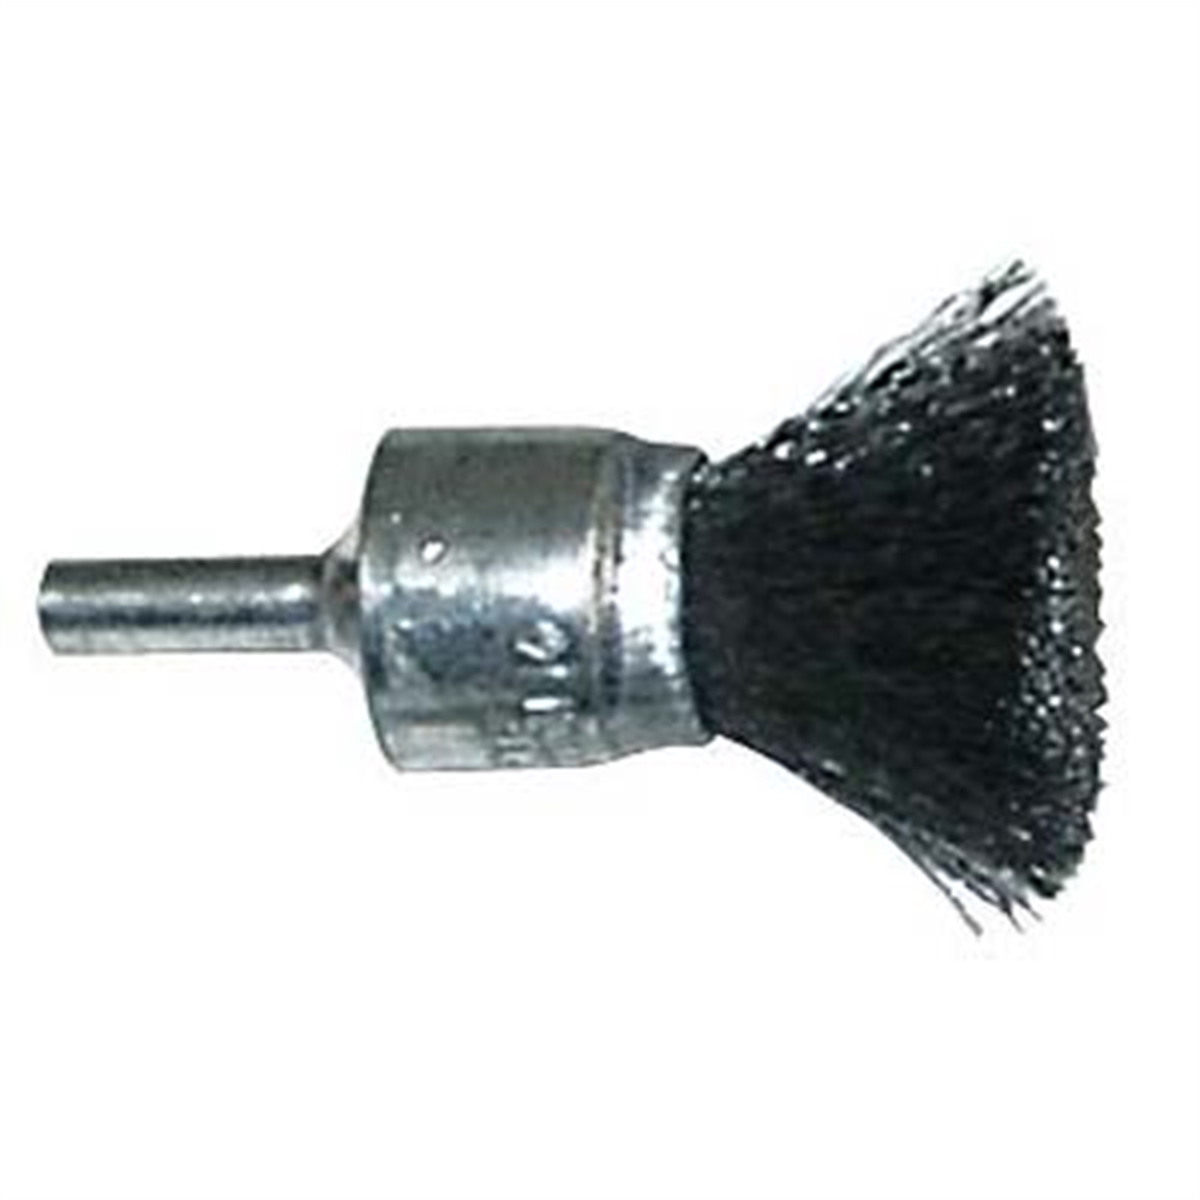 Wire Wheel Crimped End Brush - 1" x 1/4" Shank .020 Wire